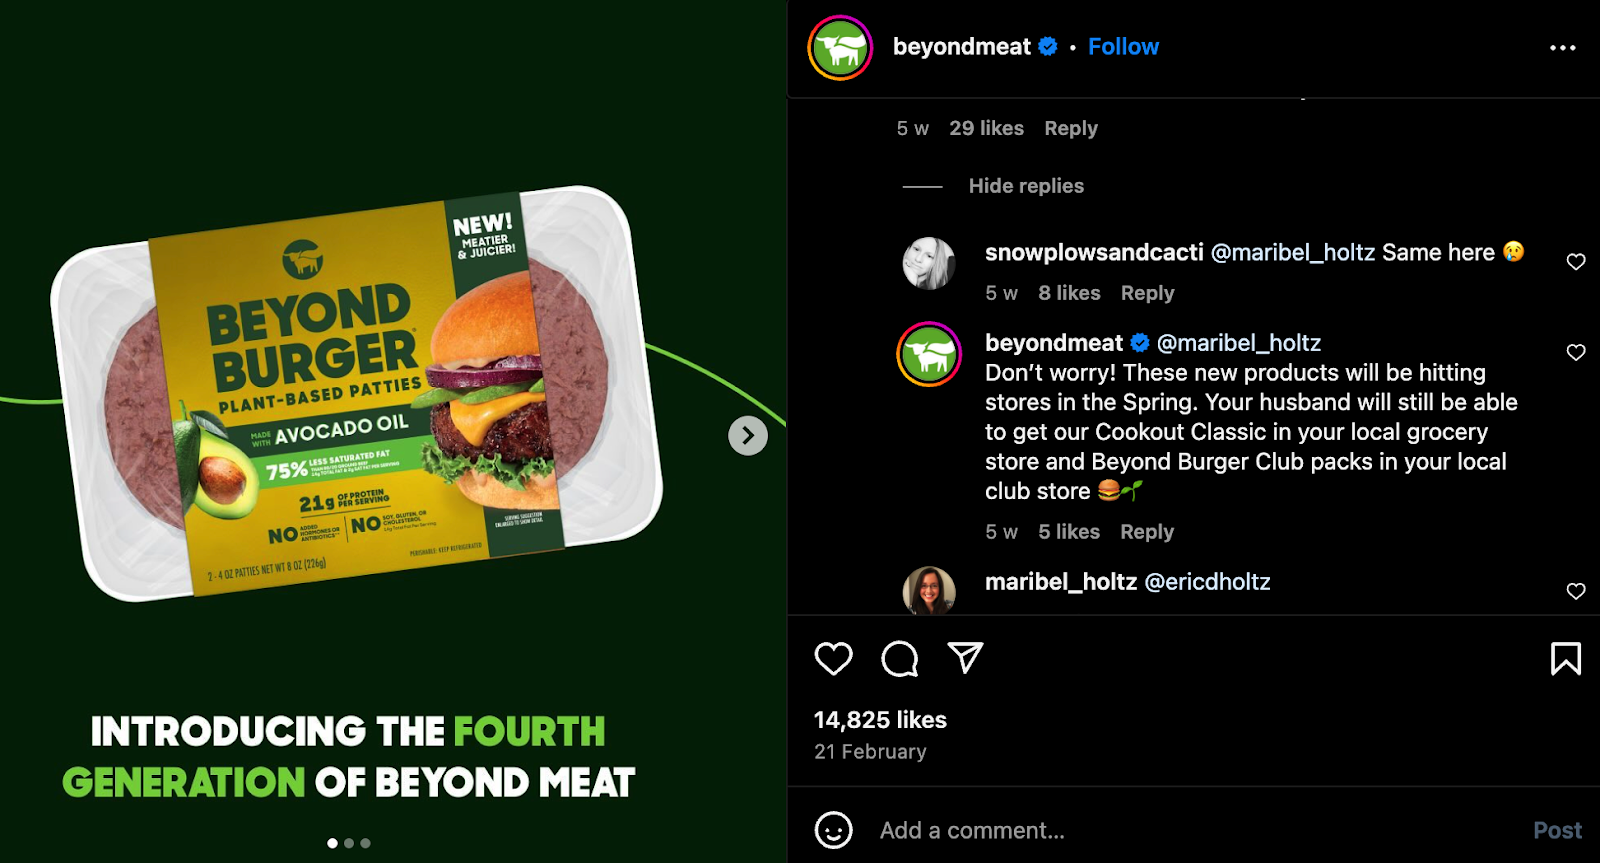 Image showing how beyondmeat engages with audience as a part of their social media marketing